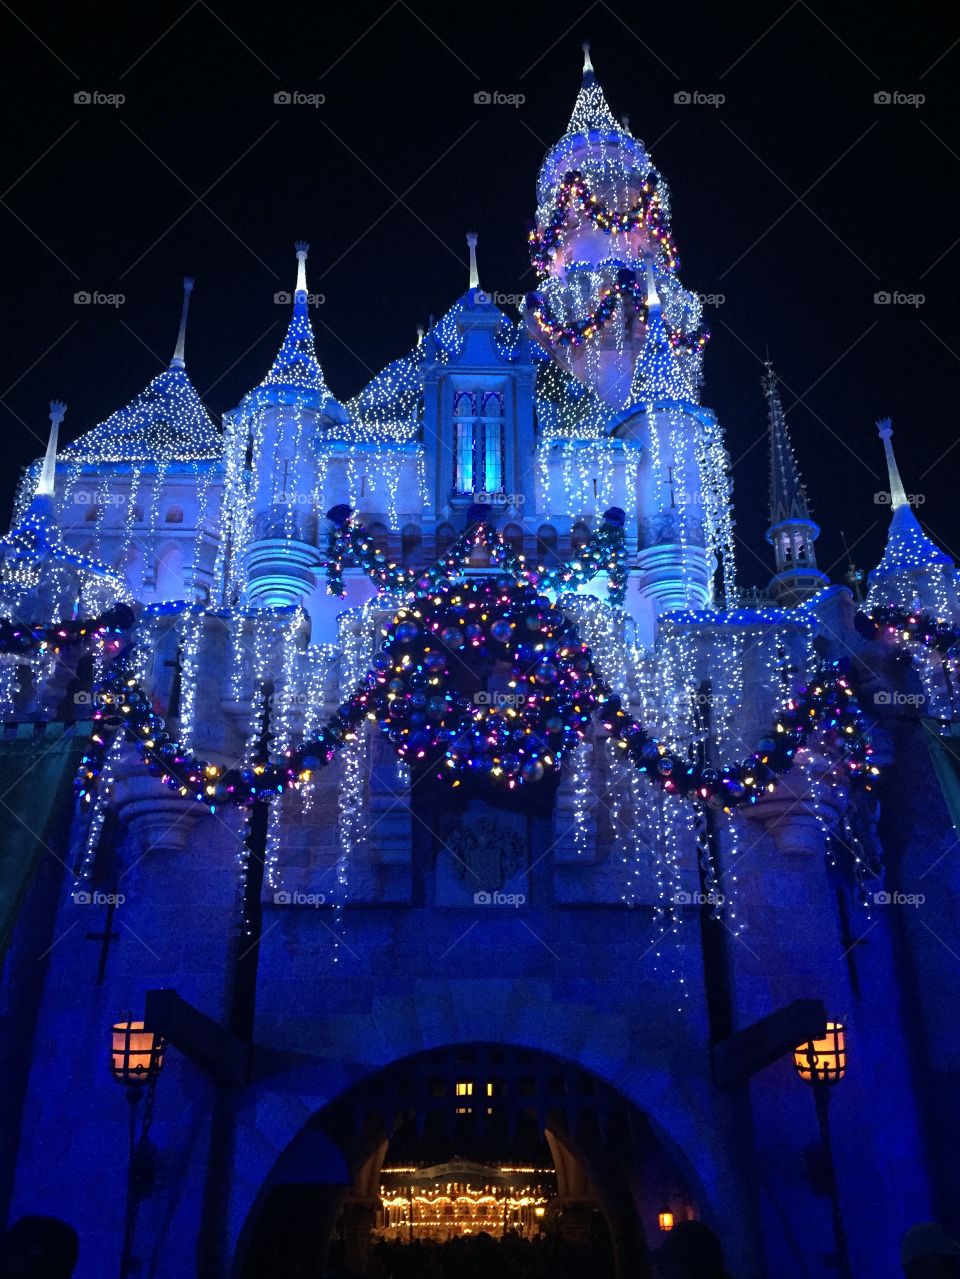 the most magical castle. 